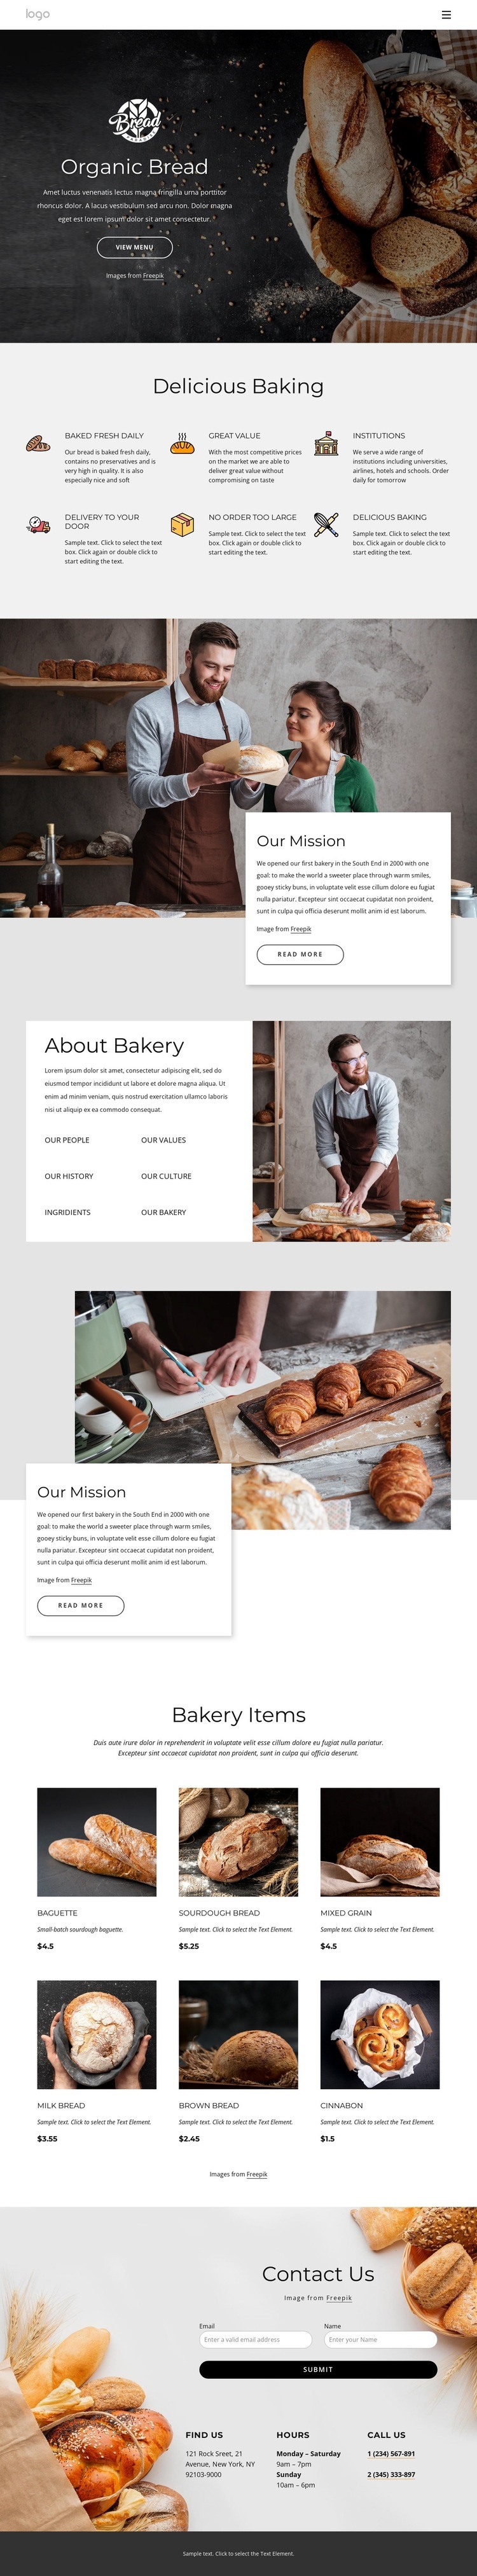 Bagels, buns, rolls, biscuits and loaf breads Webflow Template Alternative